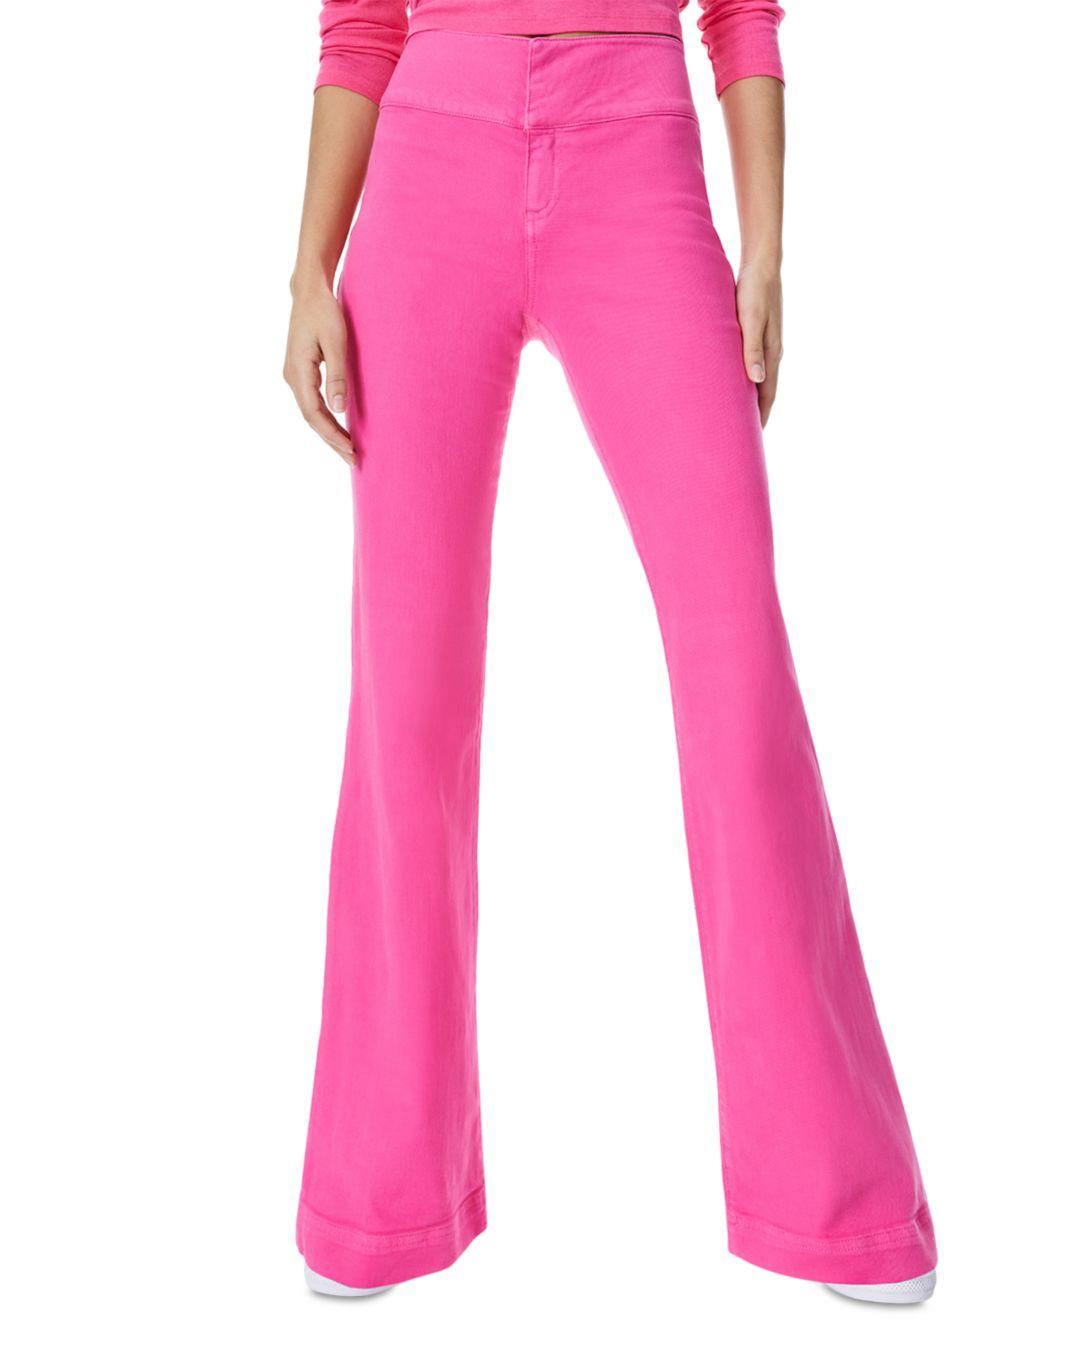 Alice + Olivia Flare Leg Jeans in Pink | Lyst